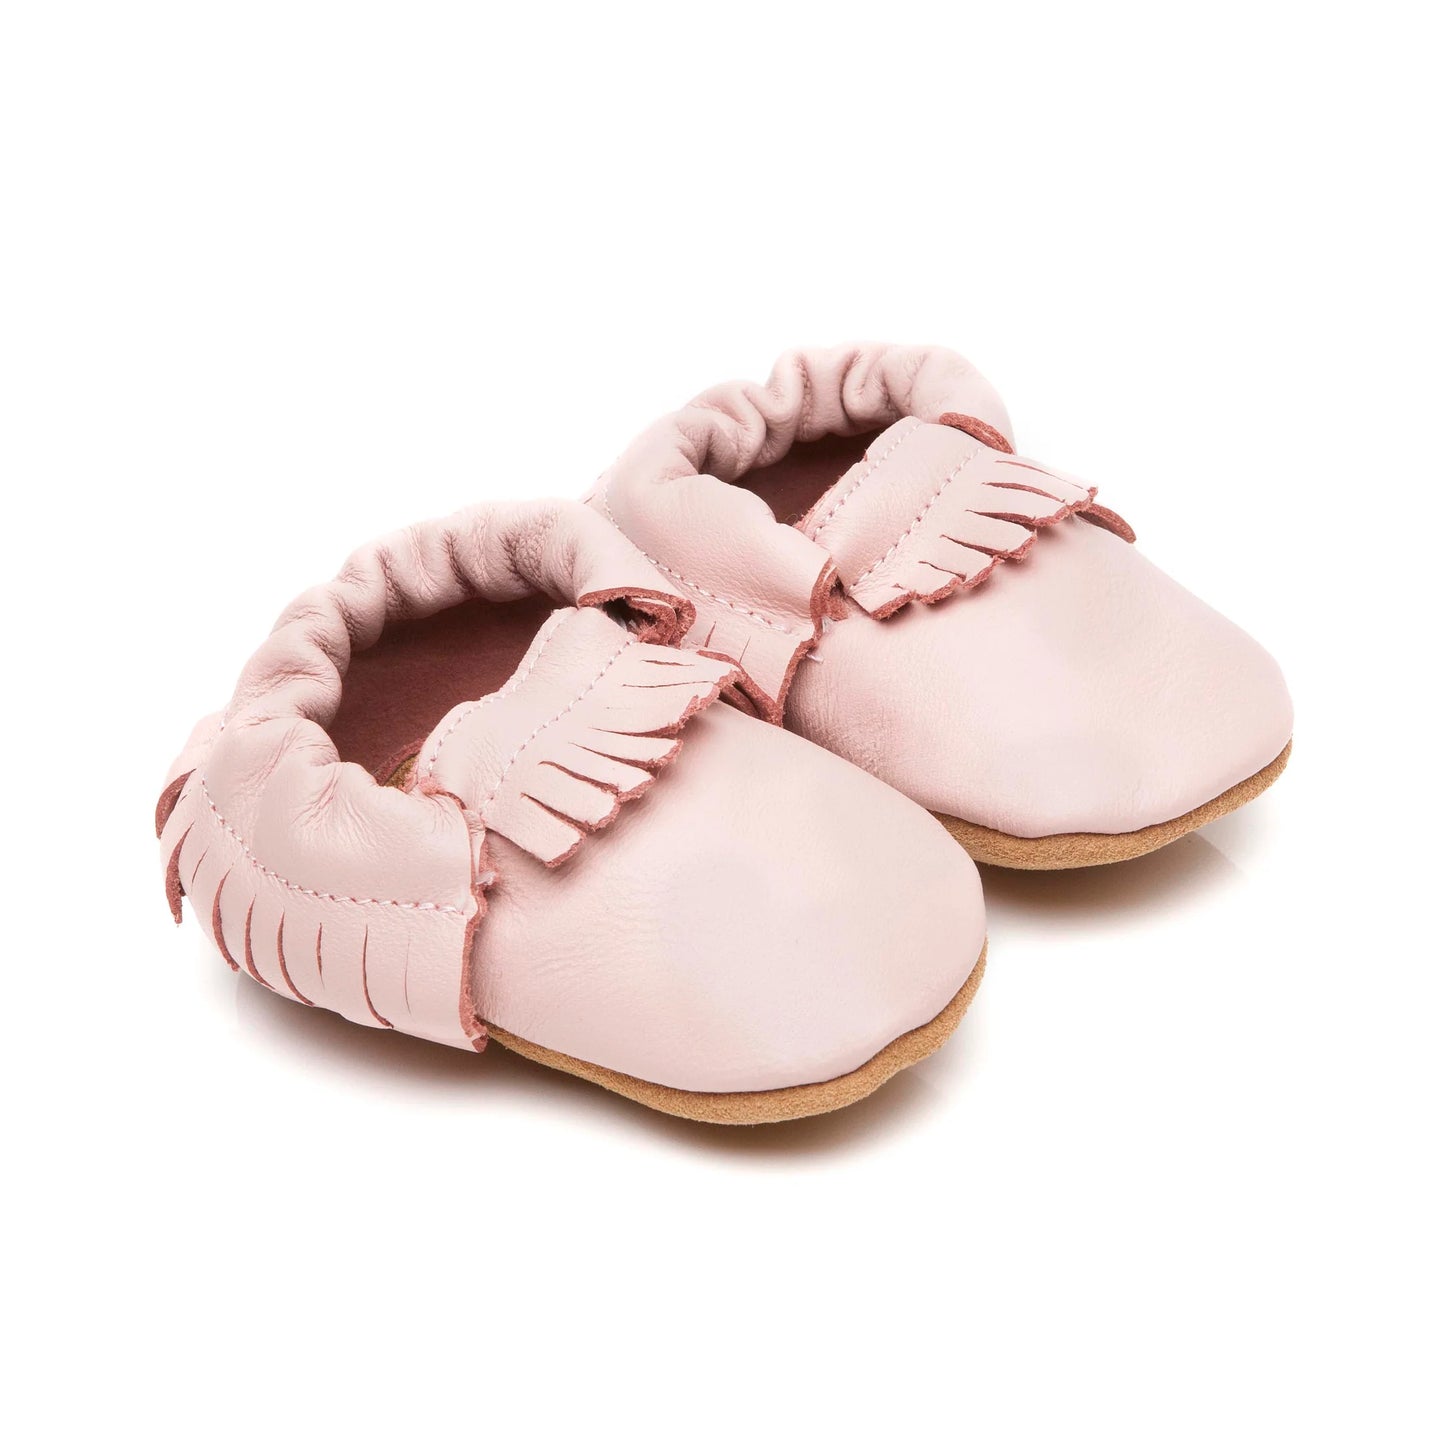 Soft Baby Moccasins Shoes in Pink By Olea